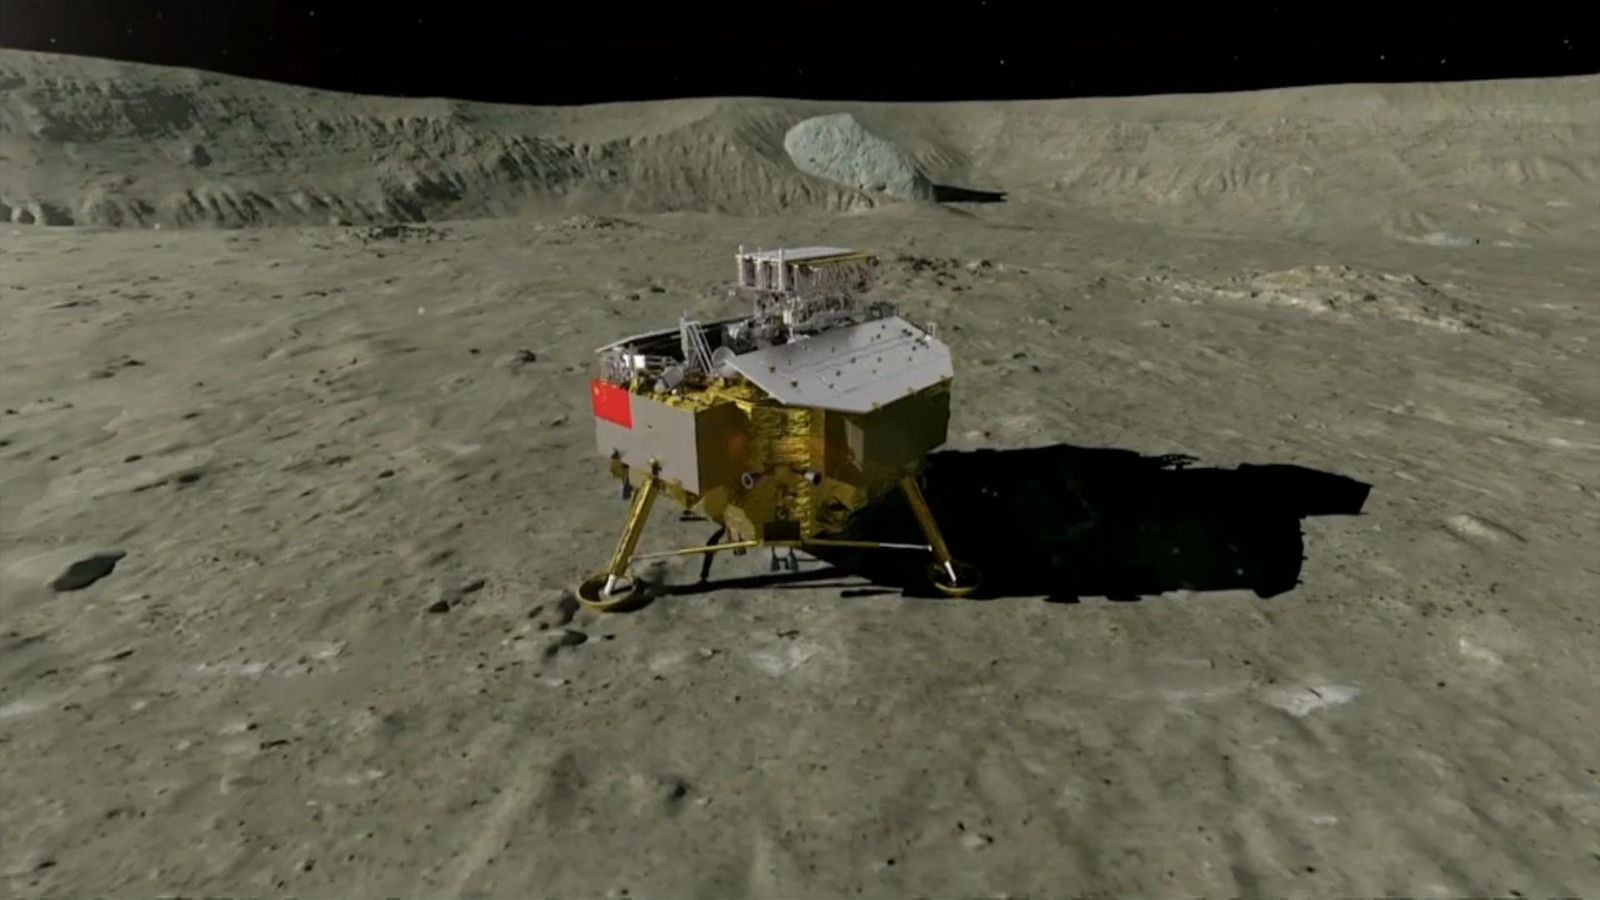 Chinese spacecraft is first to land on far side of moon World News